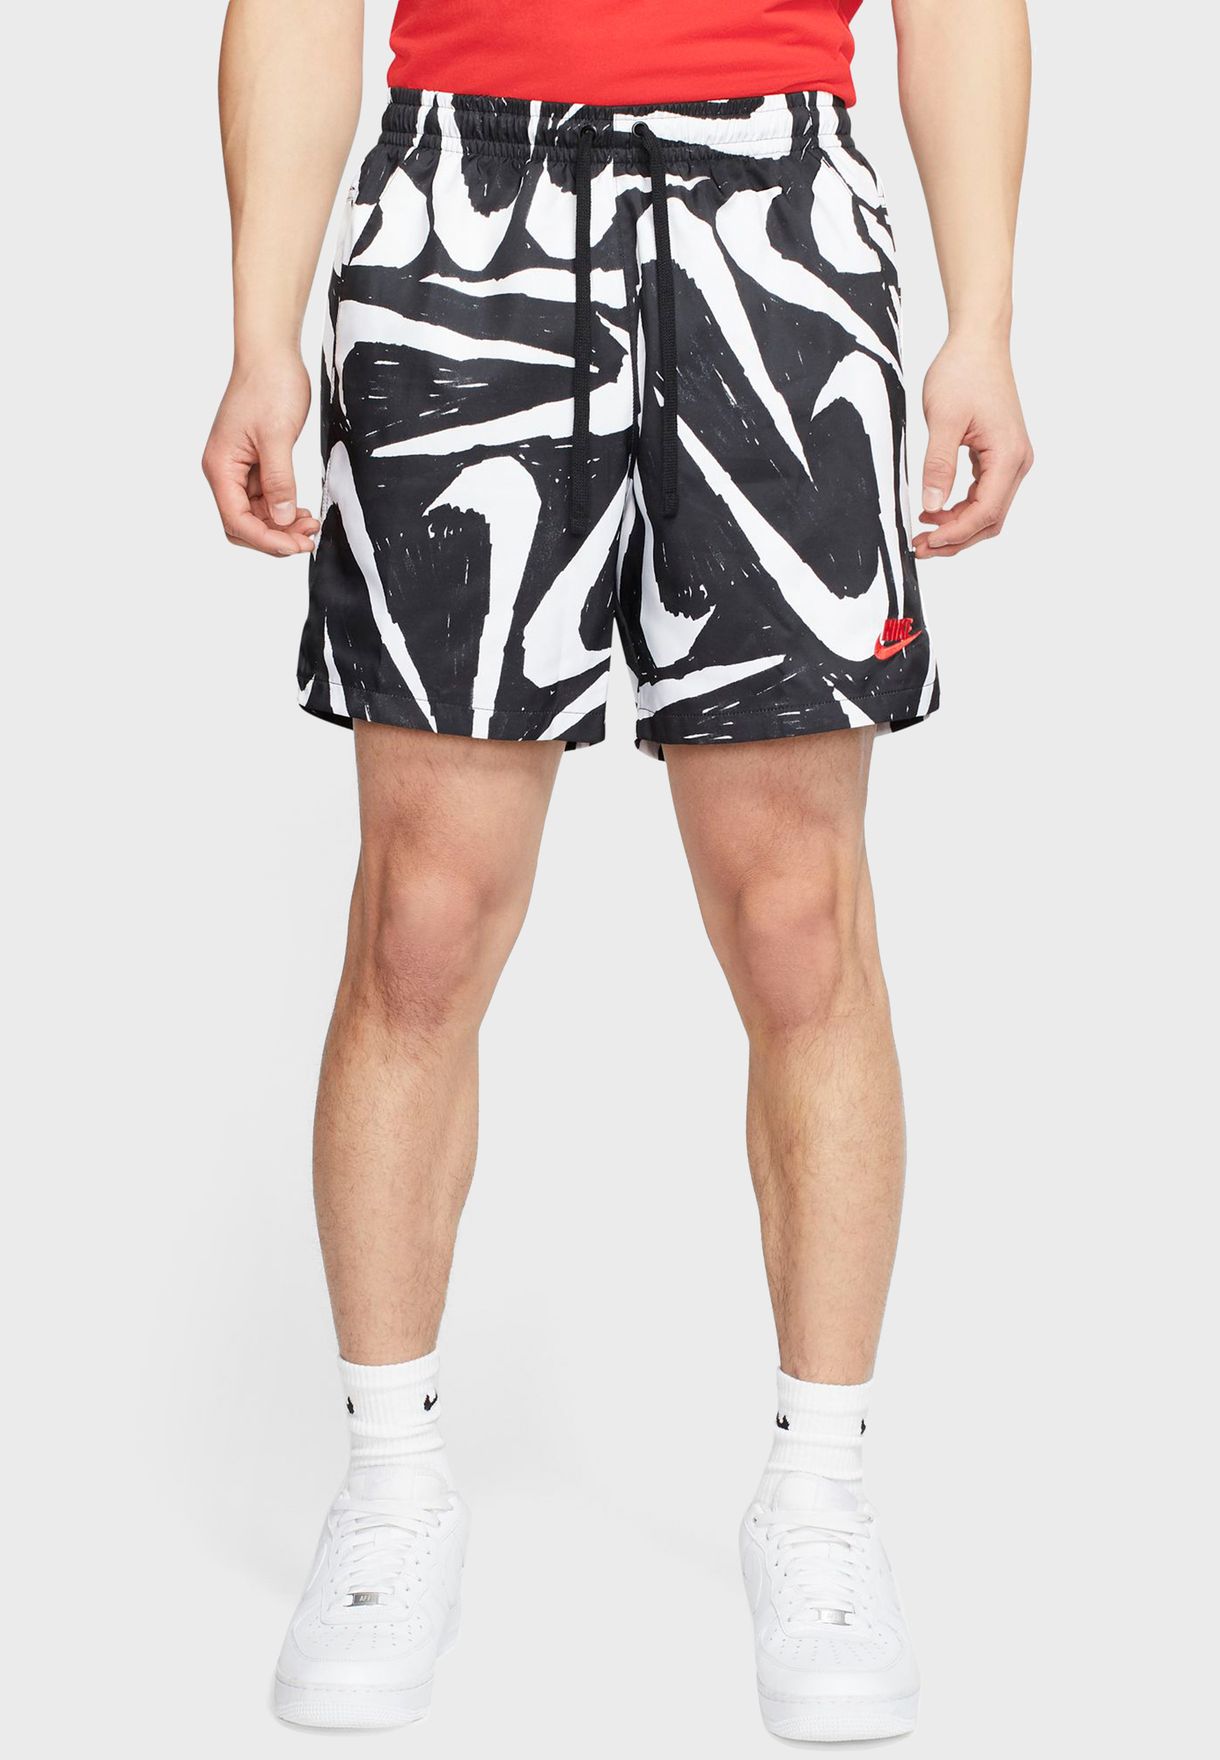 nsw woven flow shorts